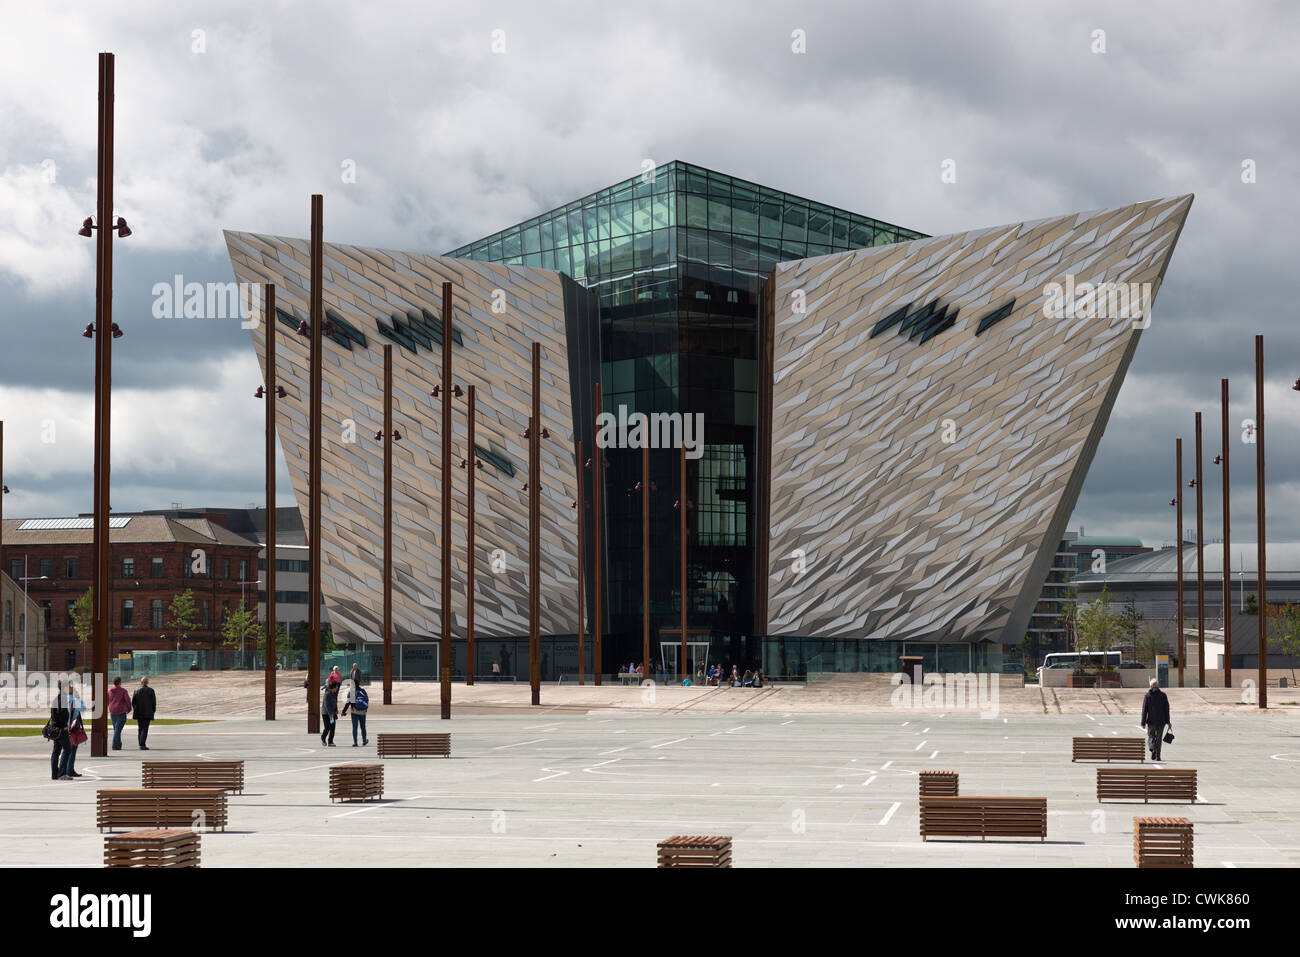 Titanic Belfast visitor attraction and monument in Titanic quarter of Belfast, Northern Ireland. Stock Photo